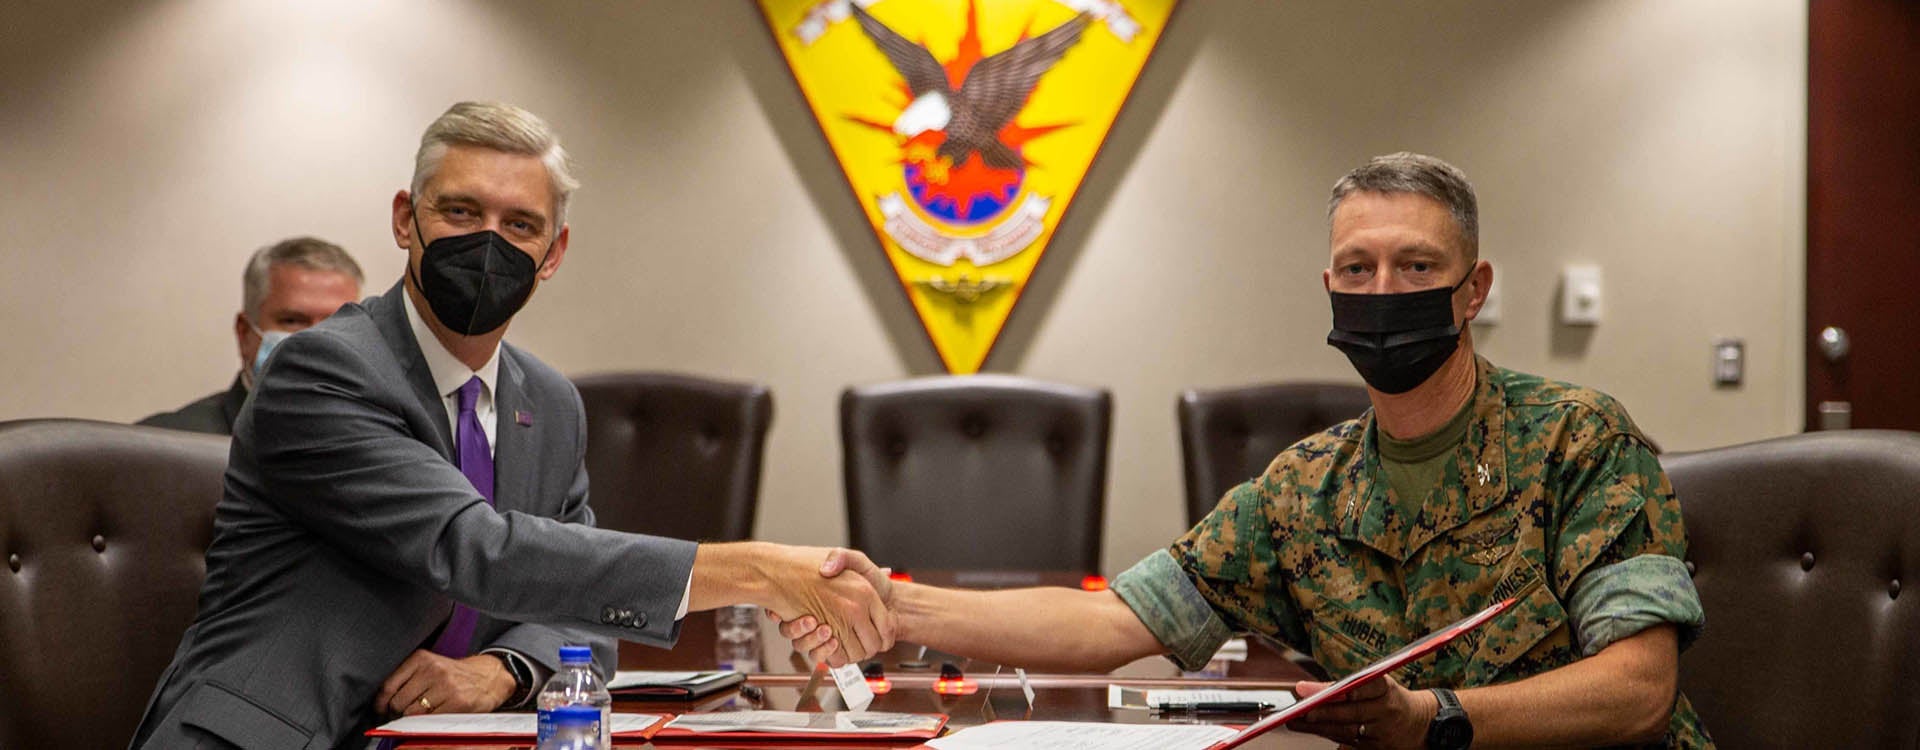 ECU Chancellor Philip Rogers, left, and Col. Mikel Huber, commanding officer at Marine Corps Air Station Cherry Point, shake hands after signing an agreement that will allow university courses to be taught on the base. (Marine Corps photos by Lance Cpl. Jacob Bertram)